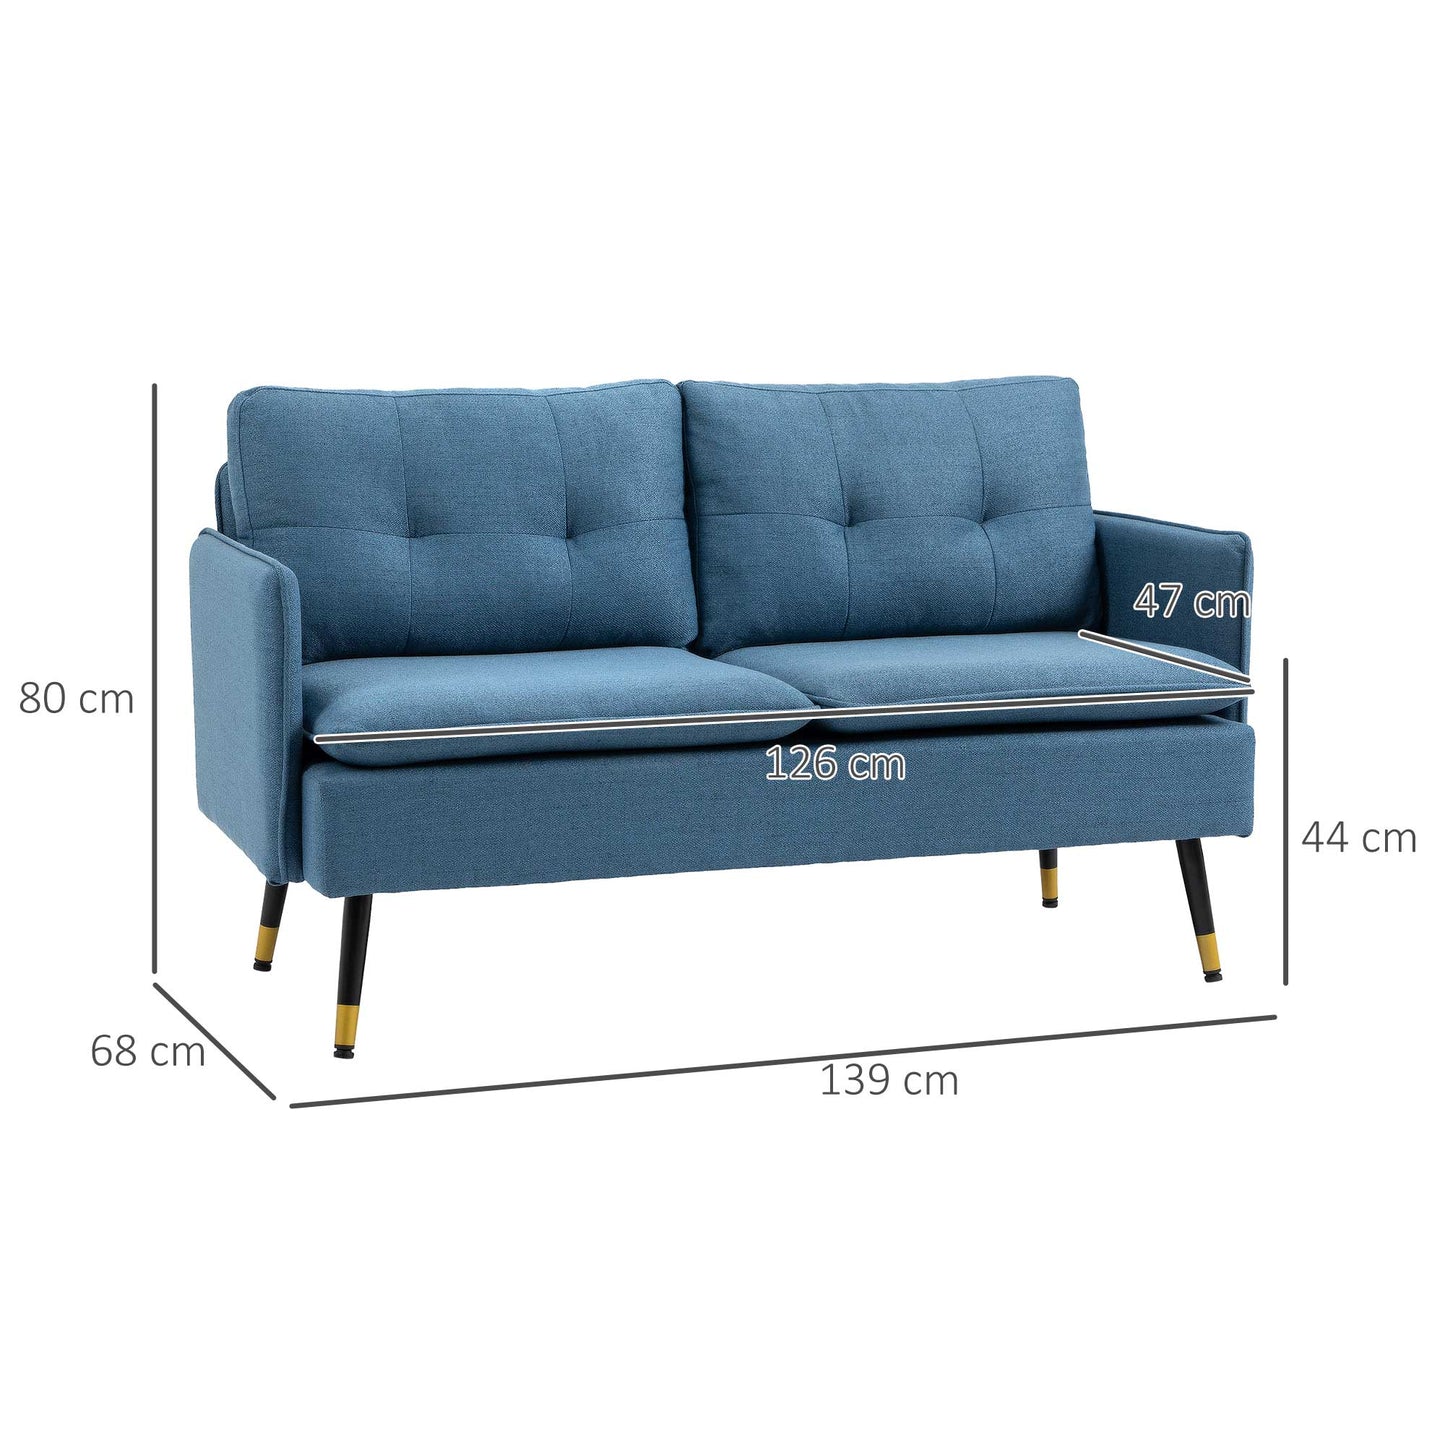 HOMCOM 2 Seater Sofas for Living Room, Fabric Couch, Button Tufted Love Seat with Cushions, Dark Blue